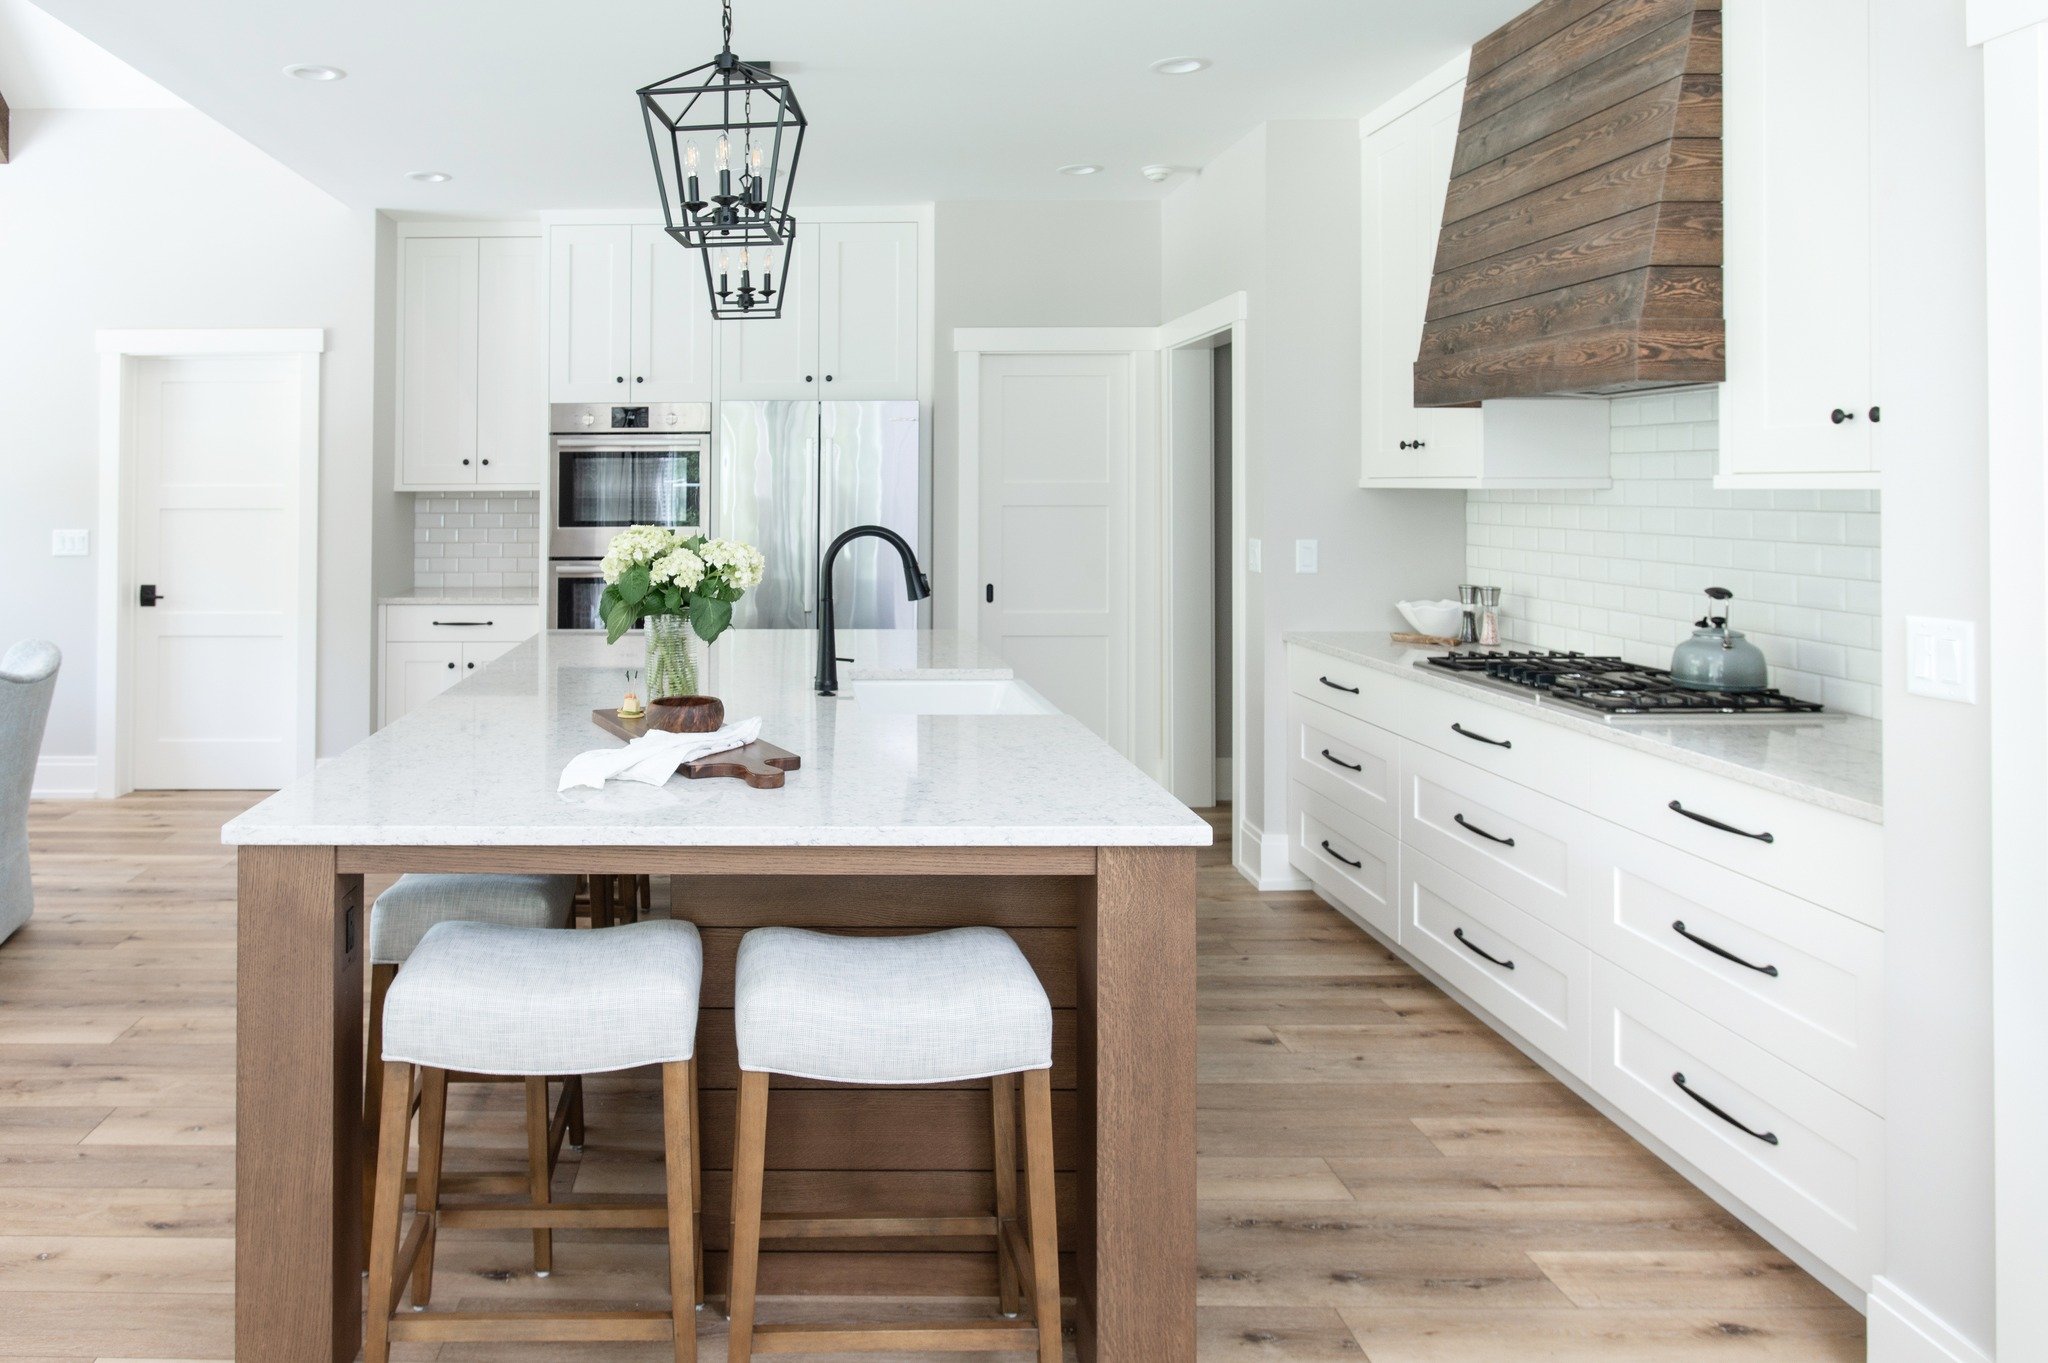 The kitchen is the heart of the home. It is where meals are prepared, conversations are shared, and memories are made. We love being a part of the design process and diving deep into how our clients want their kitchens to feel &amp; function. 

Build